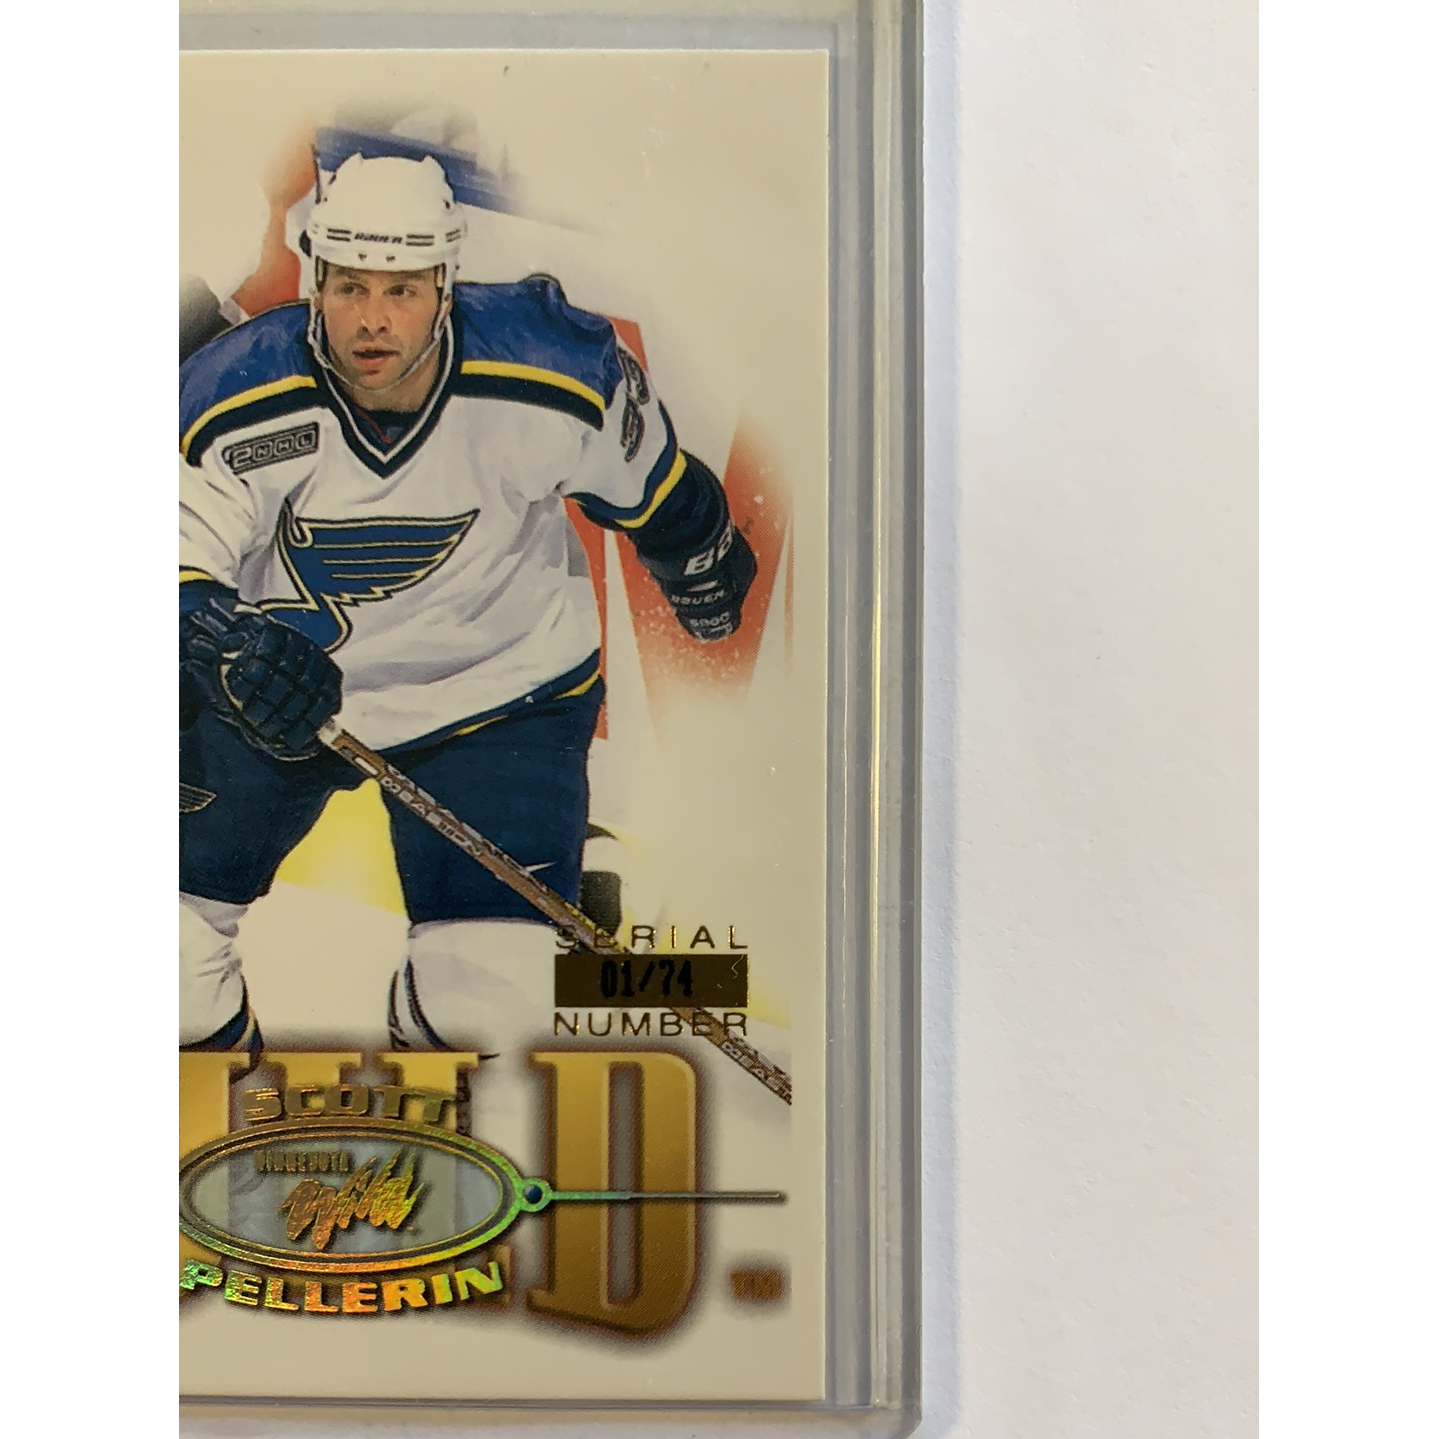  2000-01 Pacific Paramount Scott Pellerin Gold Holo /74  Local Legends Cards & Collectibles